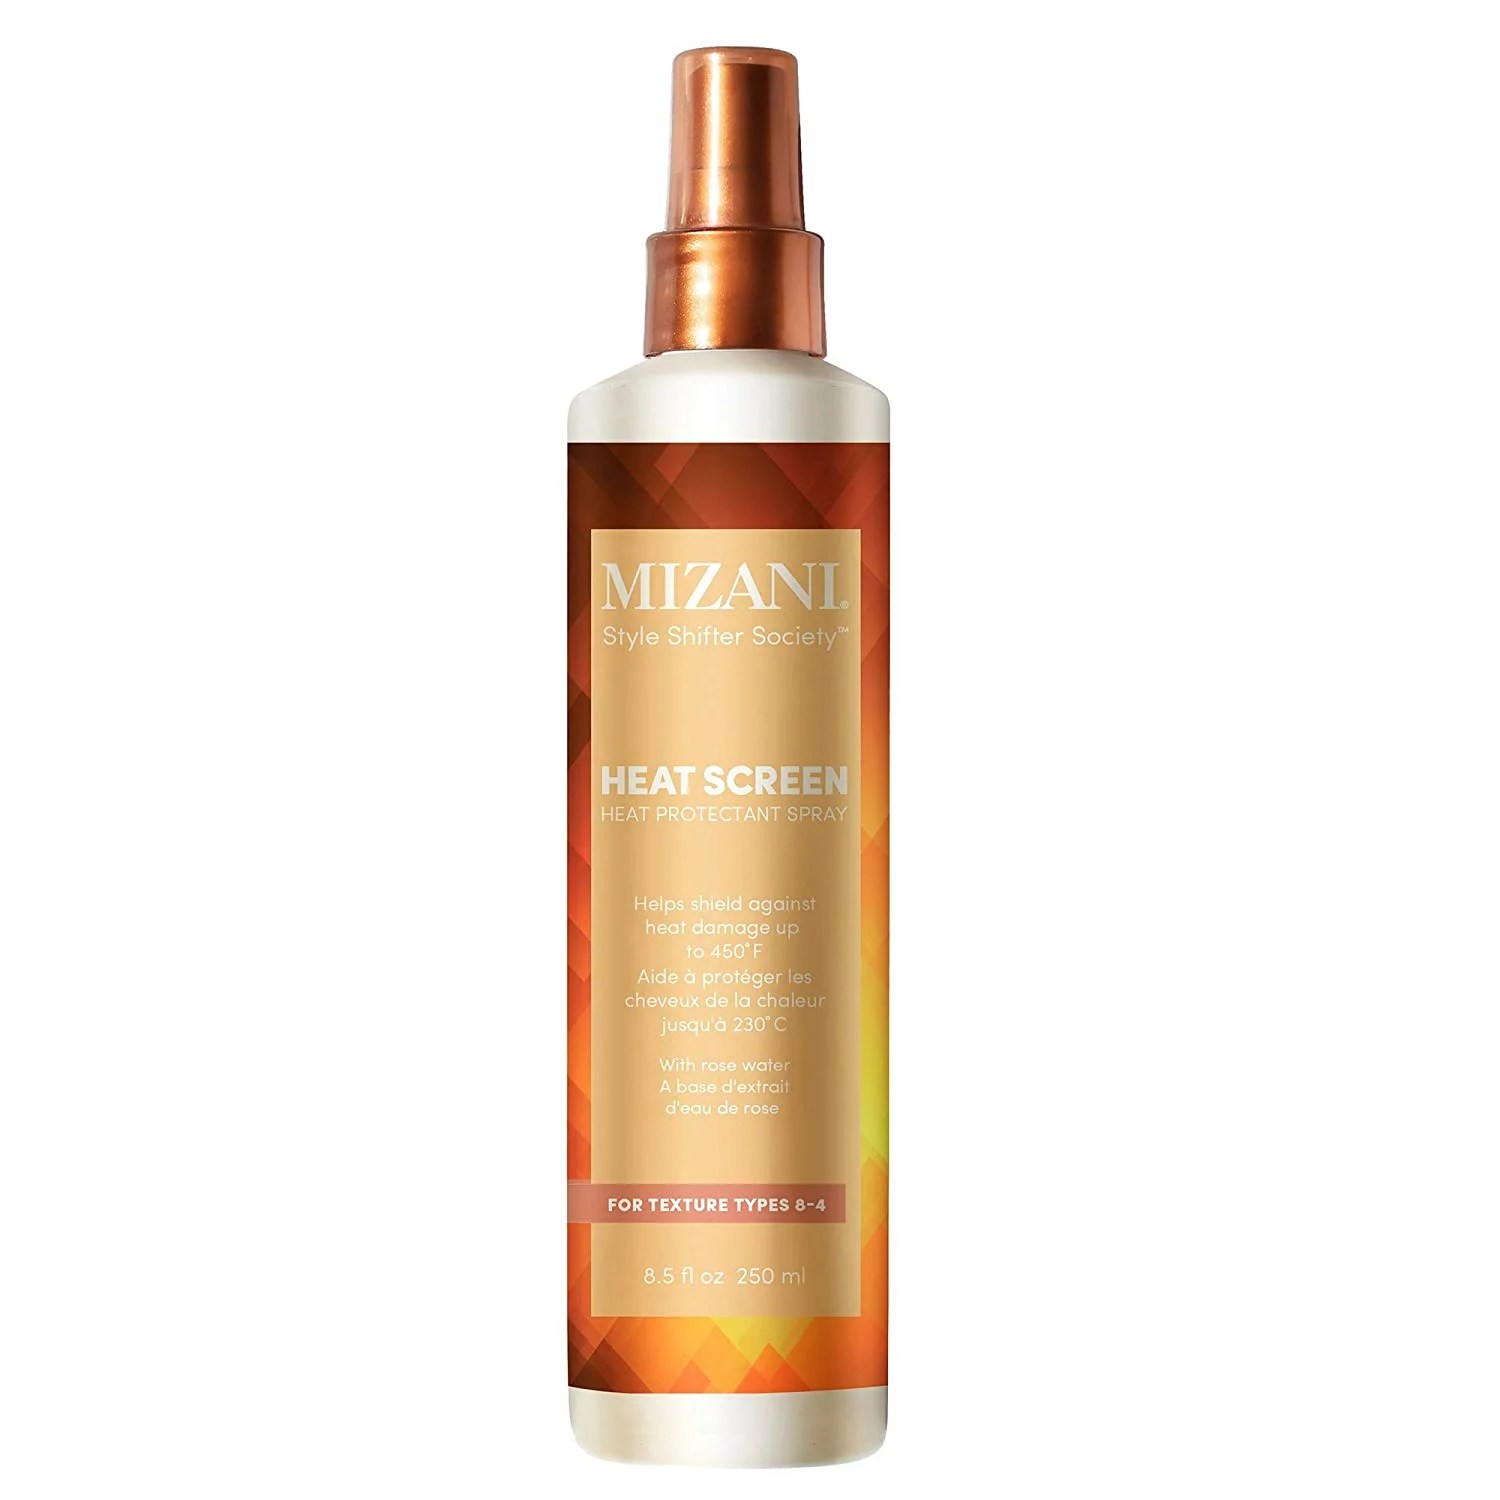 Mizani Style Shifter Society Heat Screen Heat Protectant Spray, how to blow dry hair without damage